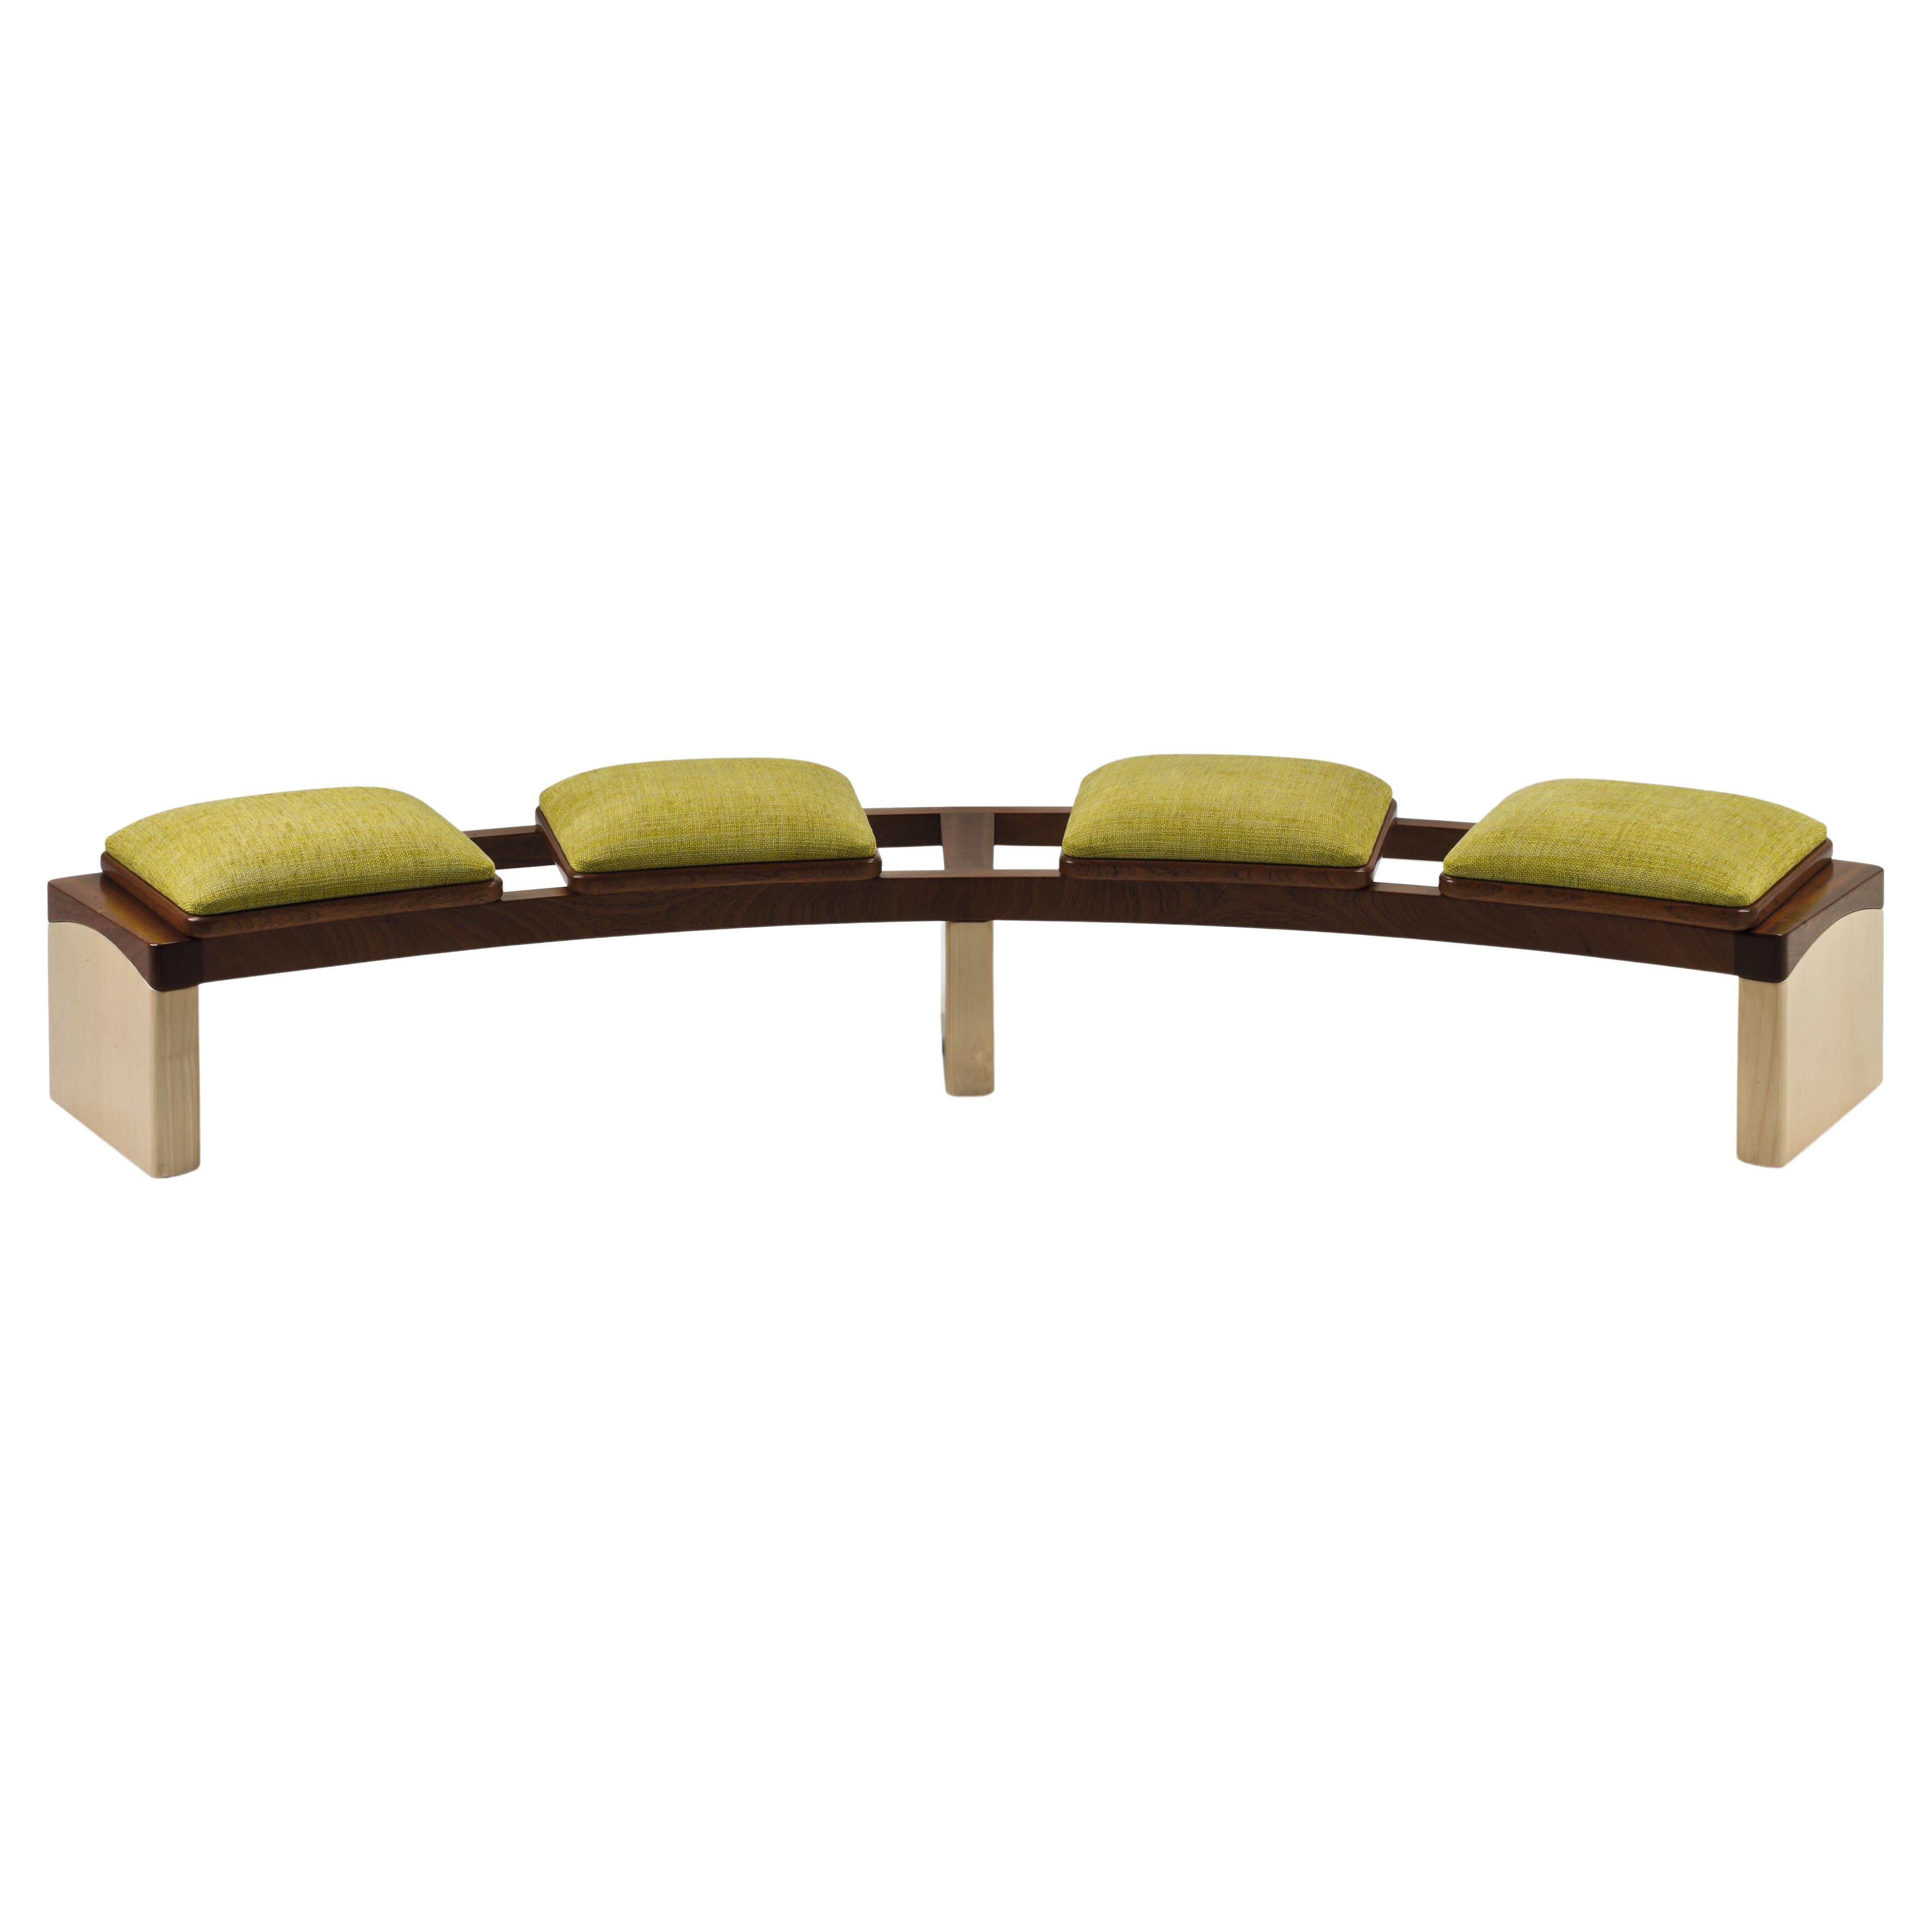 Rail Semi-circular Bench in Mahogany and Maple Wood with Padded Seat For Sale